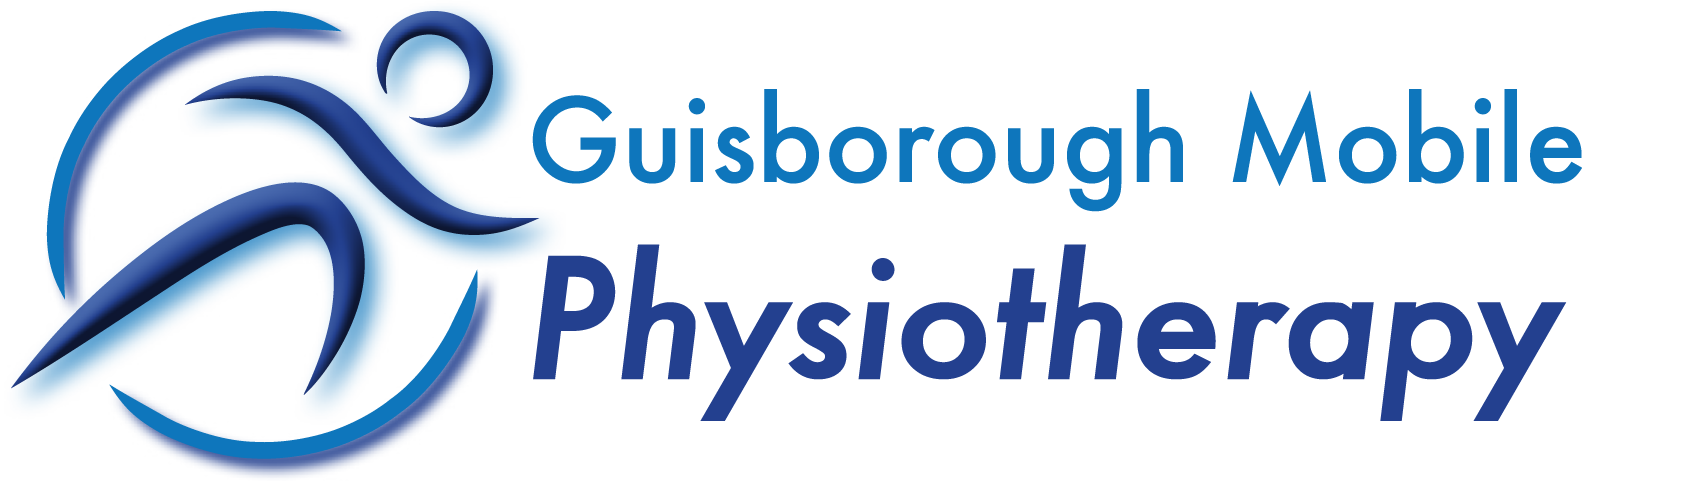 Guisborough Mobile Physiotherapy